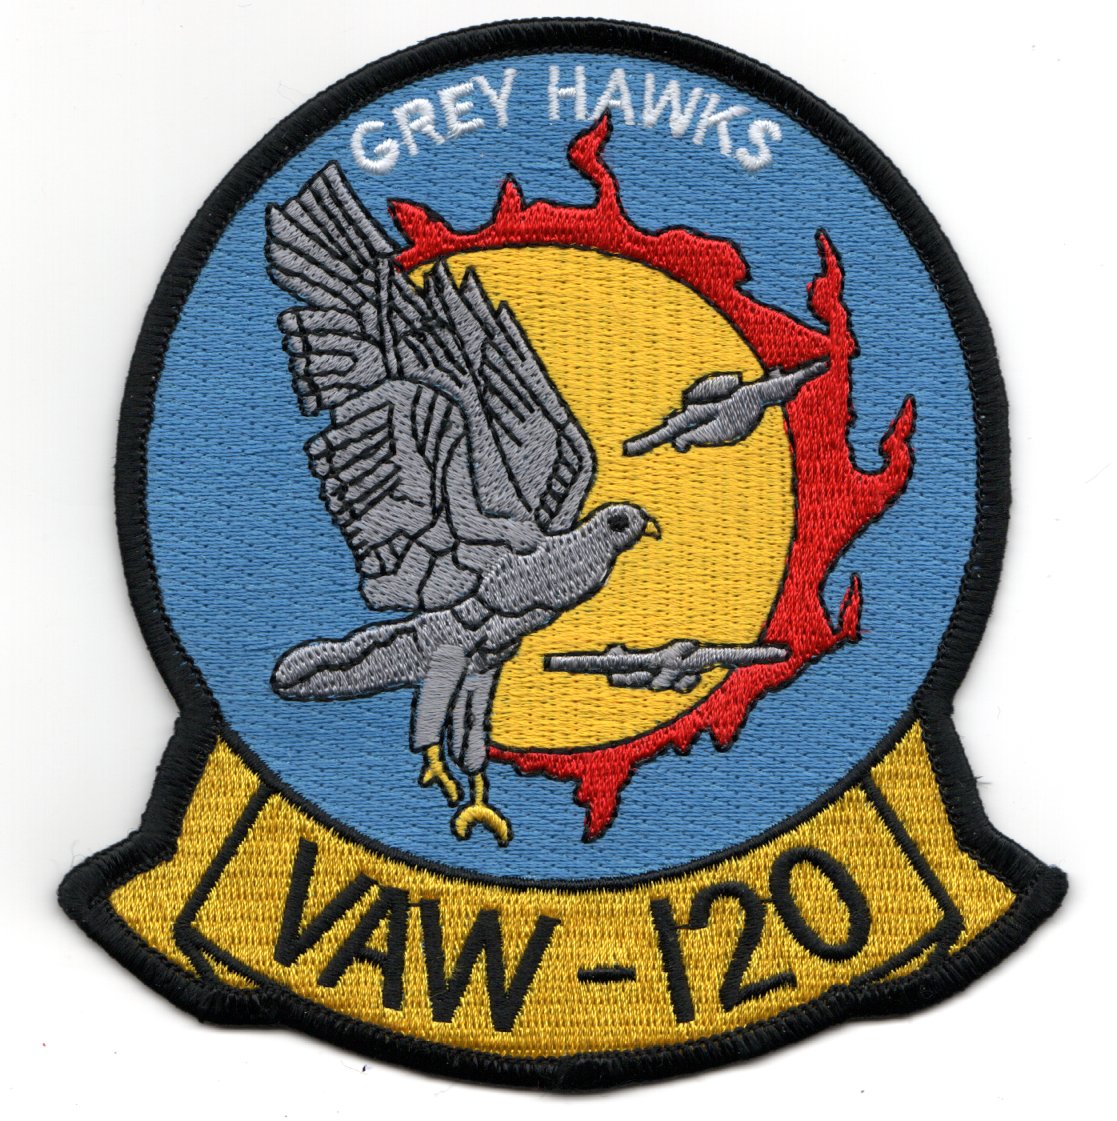 VAW-120 'HISTORICAL' Squadron Patch (Blue)